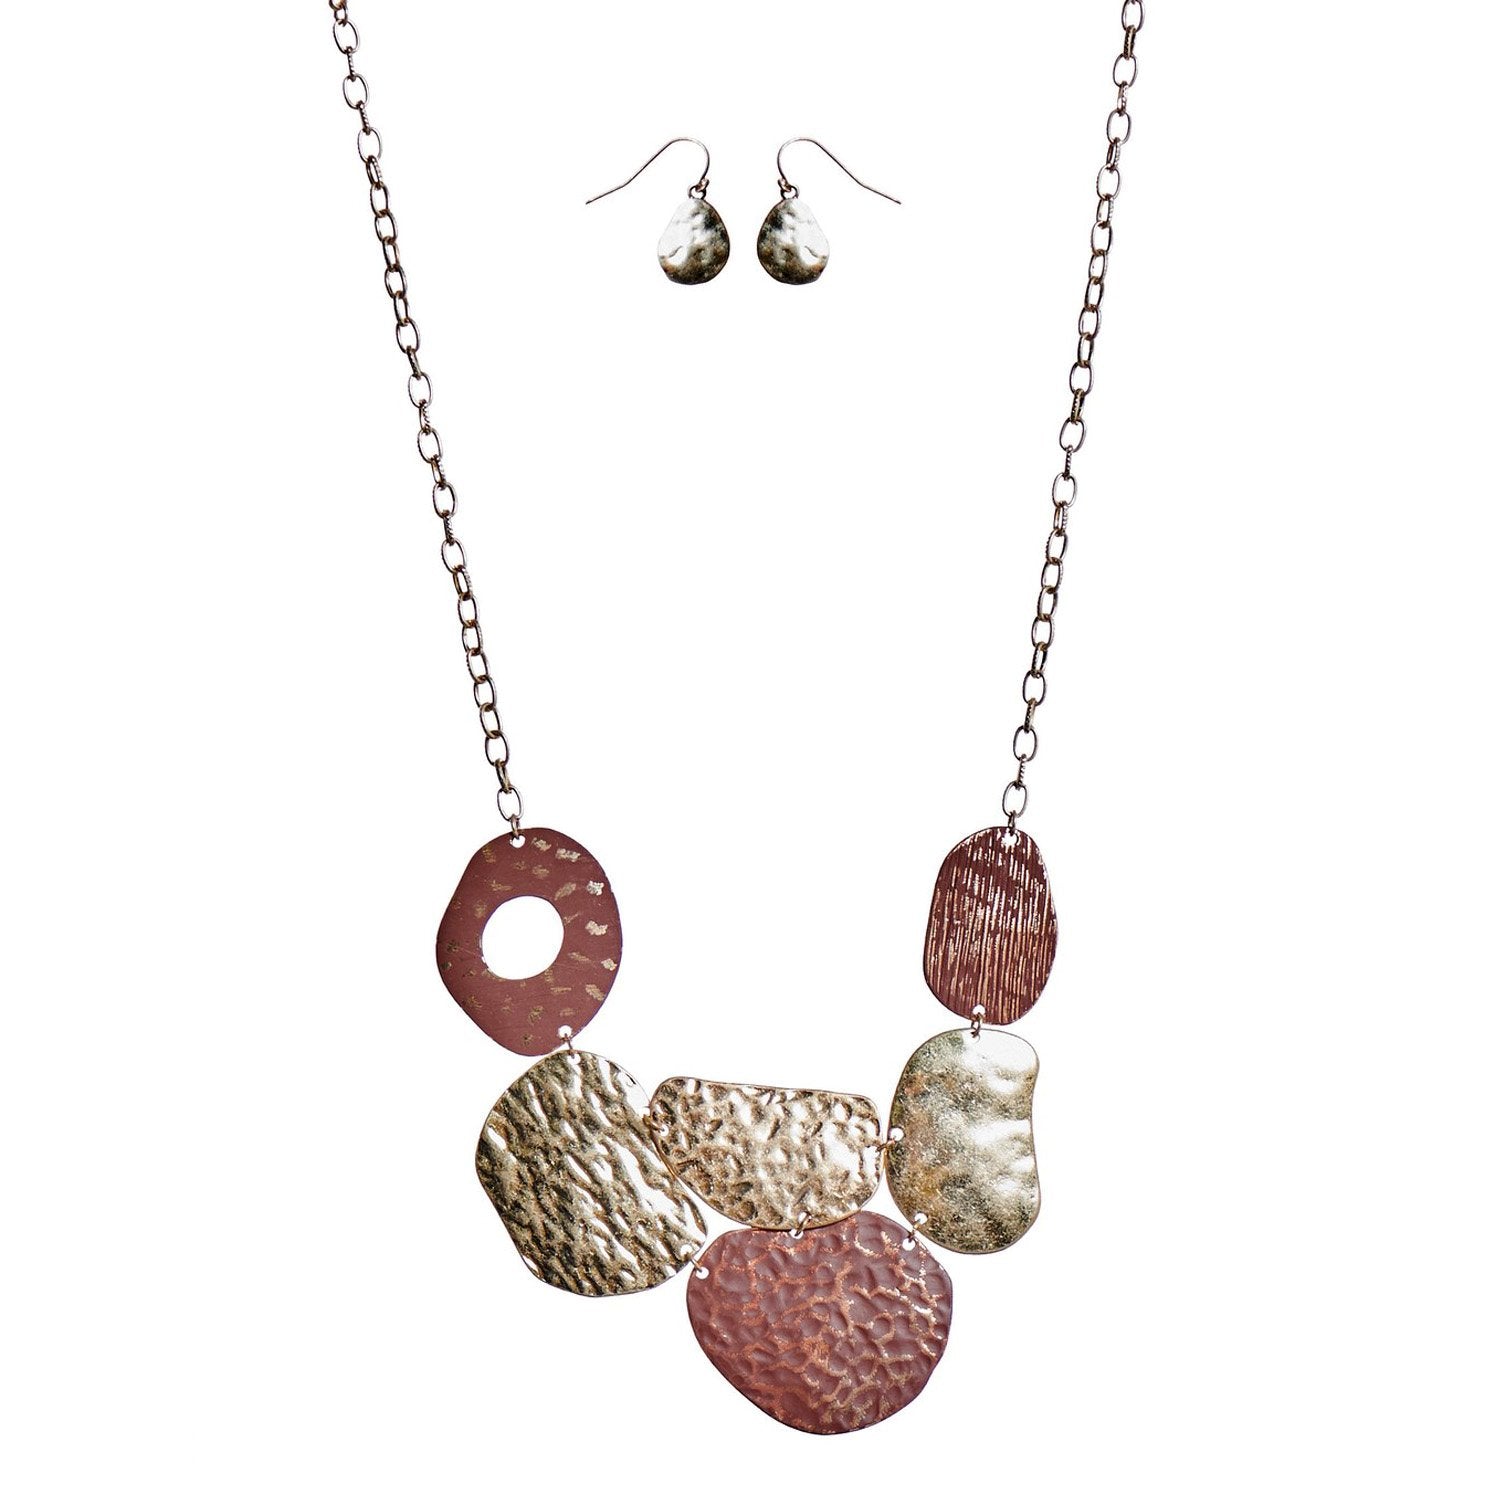 Canyon Rock Necklace & Earring Set - Assorted – The Stable Home Decor